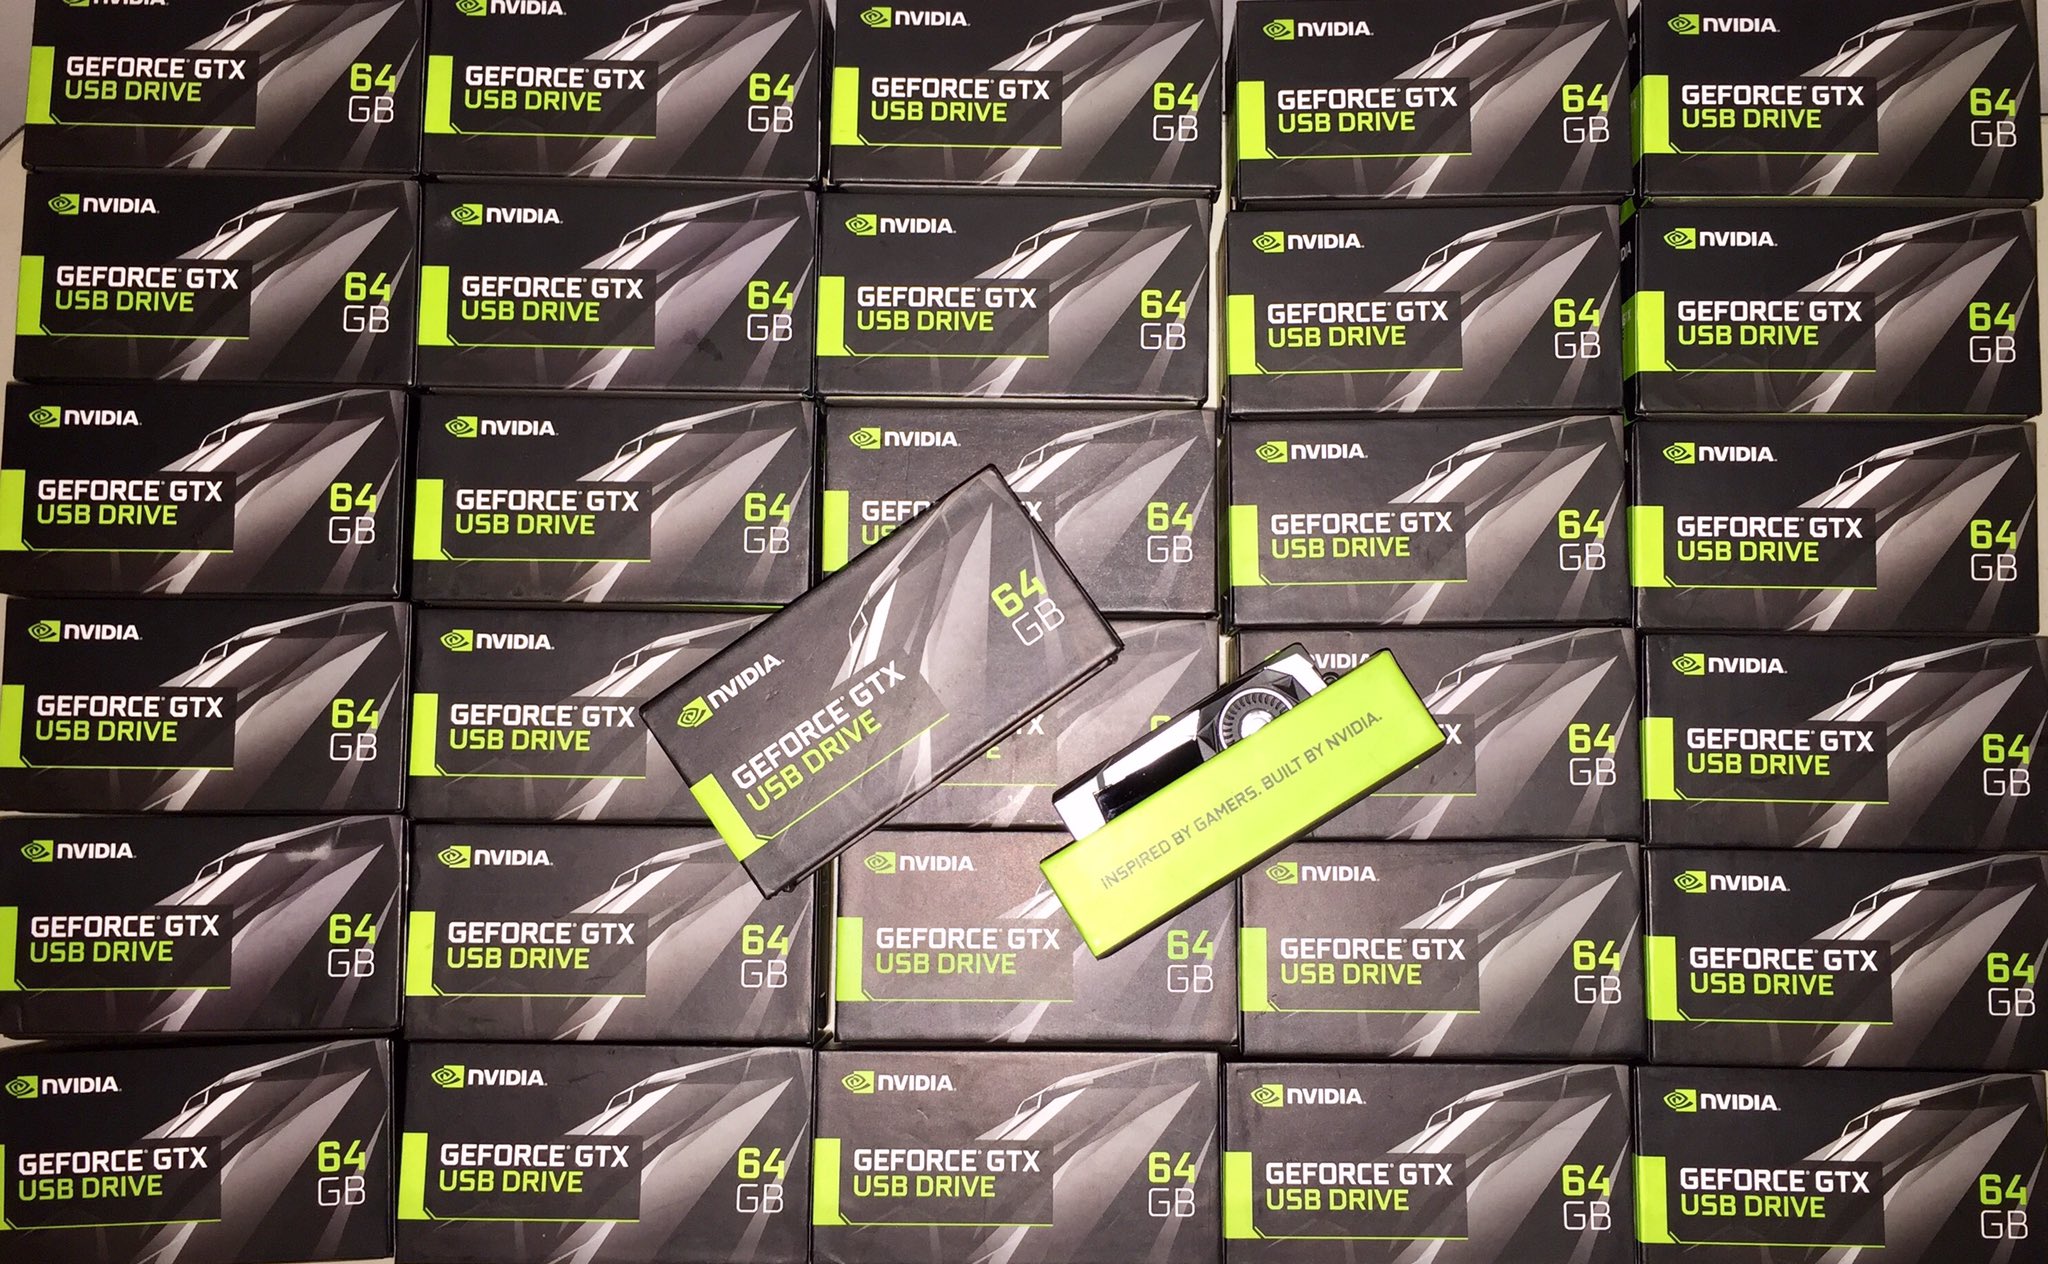 lighed spiselige svinge NVIDIA ANZ on Twitter: "#GeForce GTX USB Drive - Let us know your ideas for  giving away all these USB Drives. The competitions will start soon. 💚  #GameReady https://t.co/MV3cAwGsZH" / Twitter